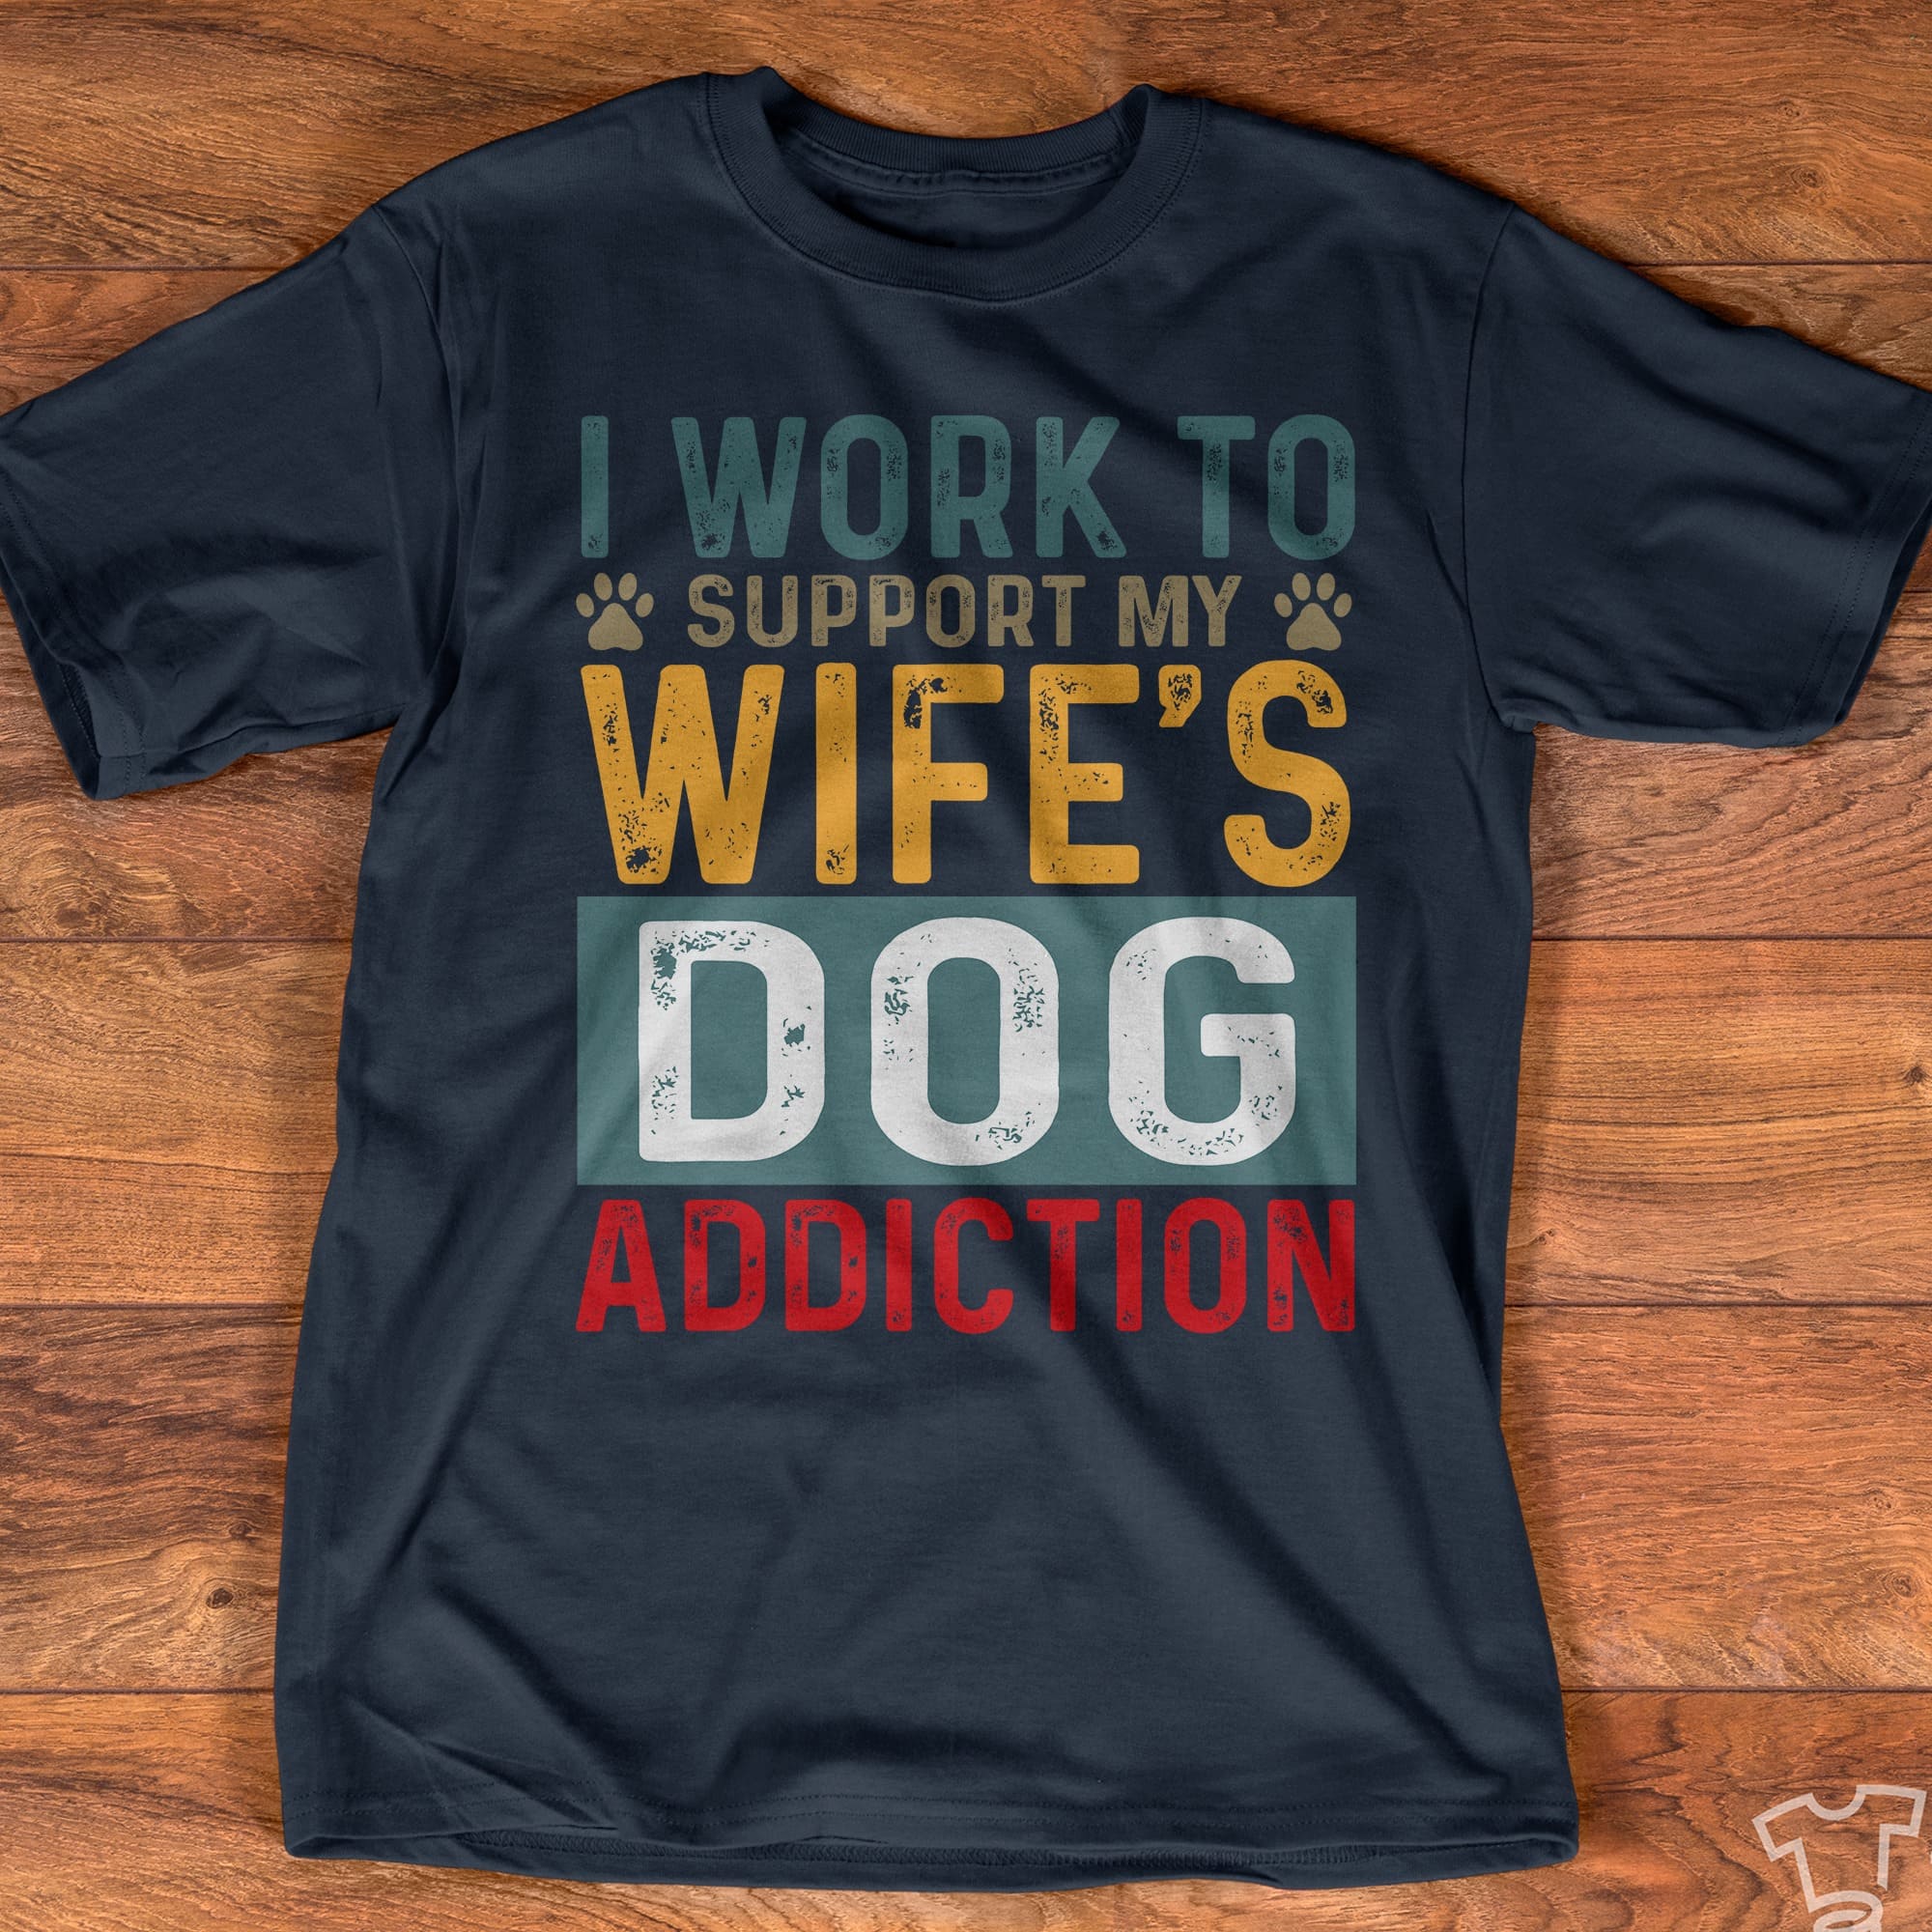 I work to support my wife's dog addiction - Wife loves dogs, husband and wife T-shirt